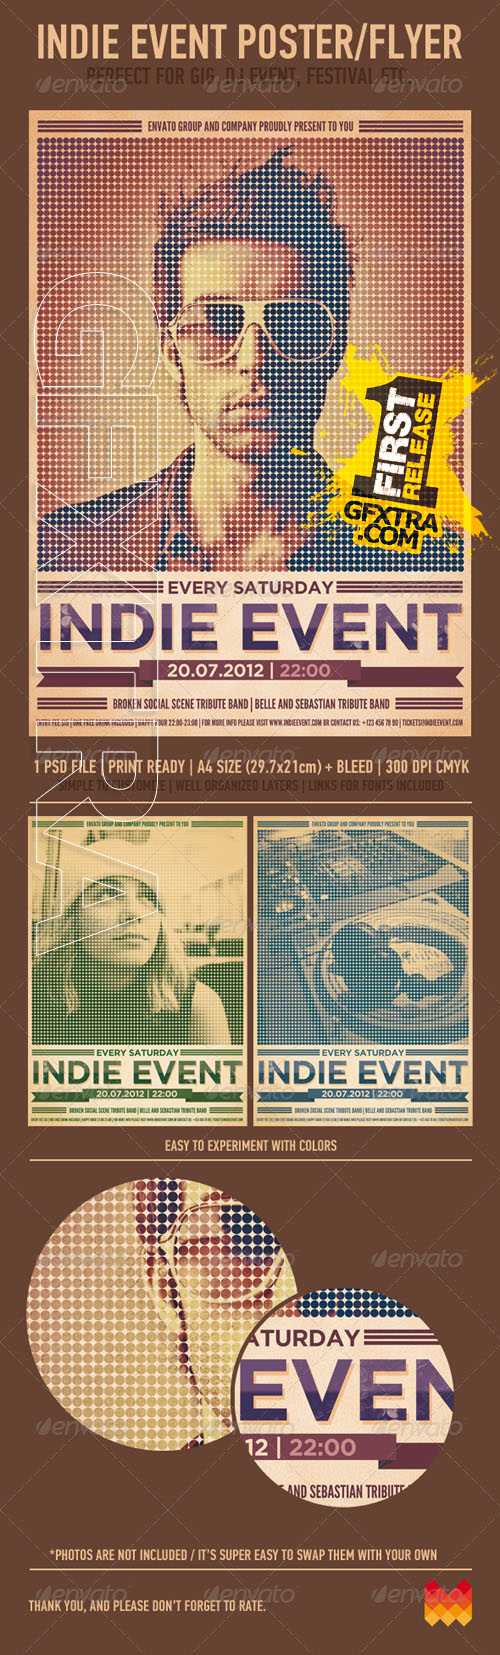 GraphicRiver: Indie Event Flyer/Poster